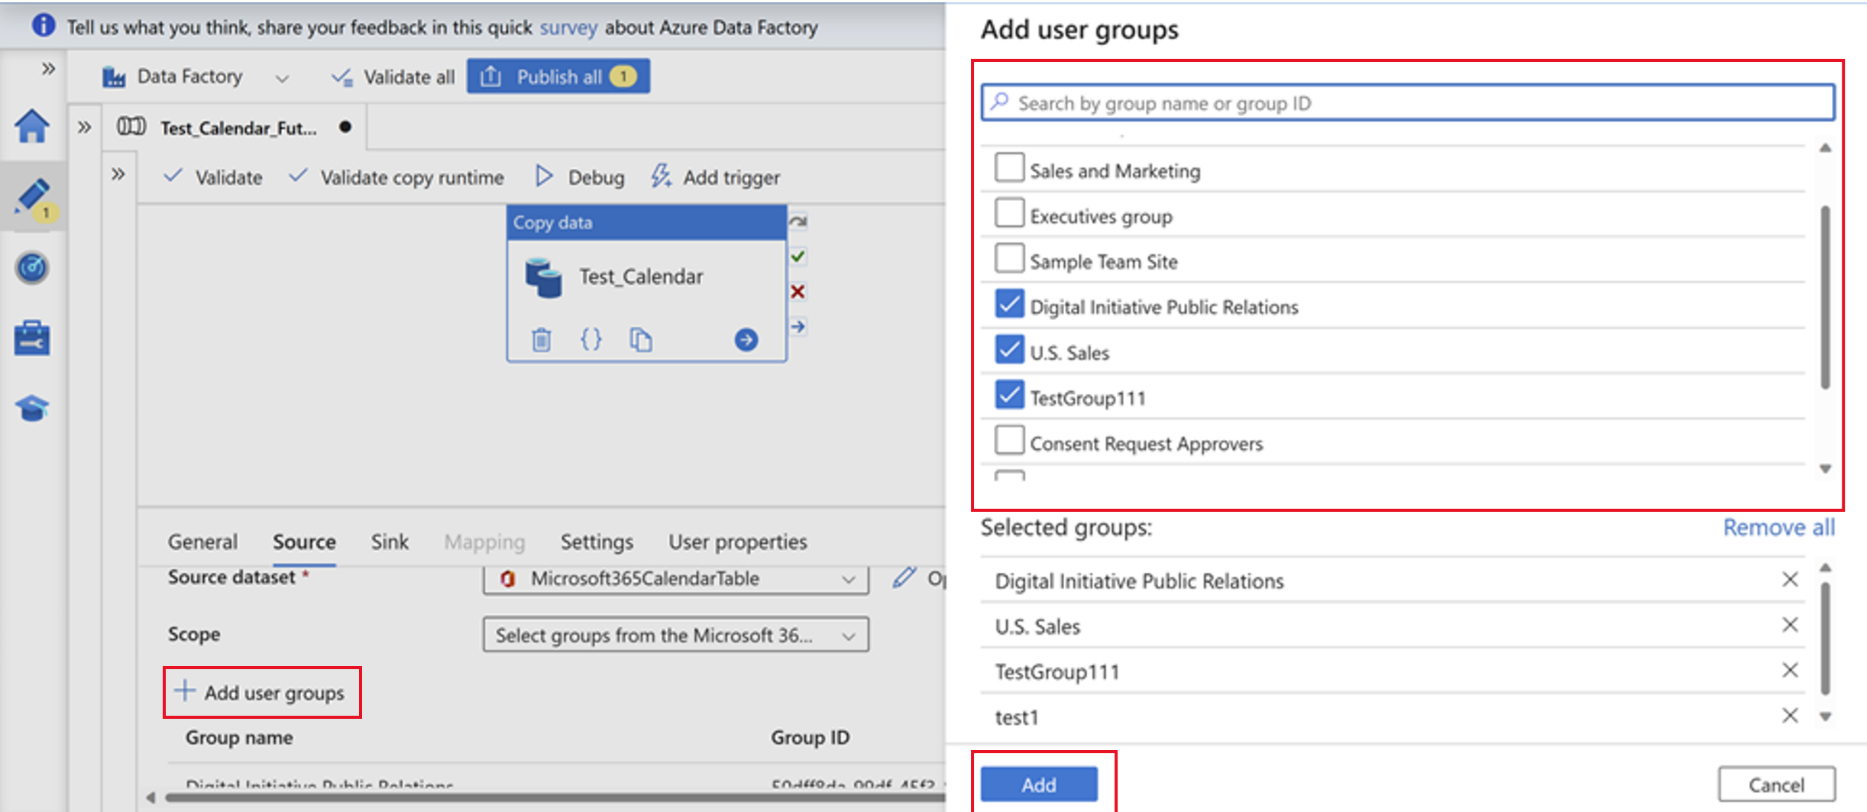 Screenshot of the ADF portal with Add user groups and the Add button highlighted